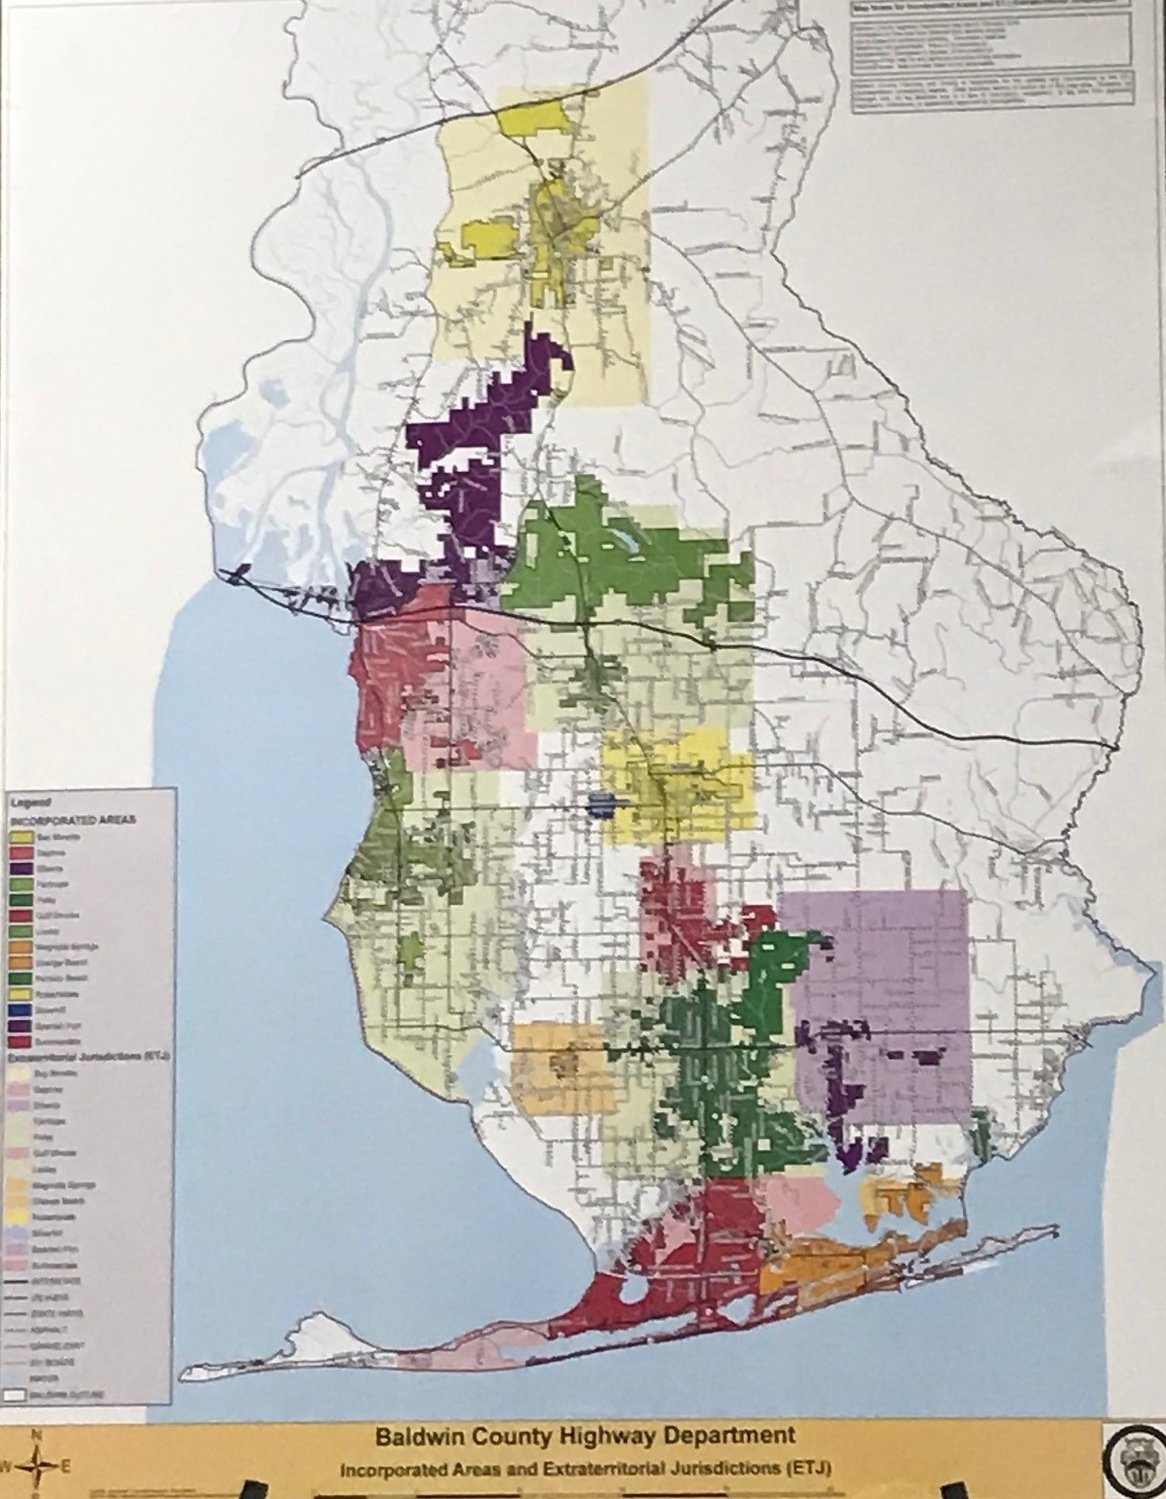 A Baldwin County map shows city limits and planning jurisdiction boundaries.